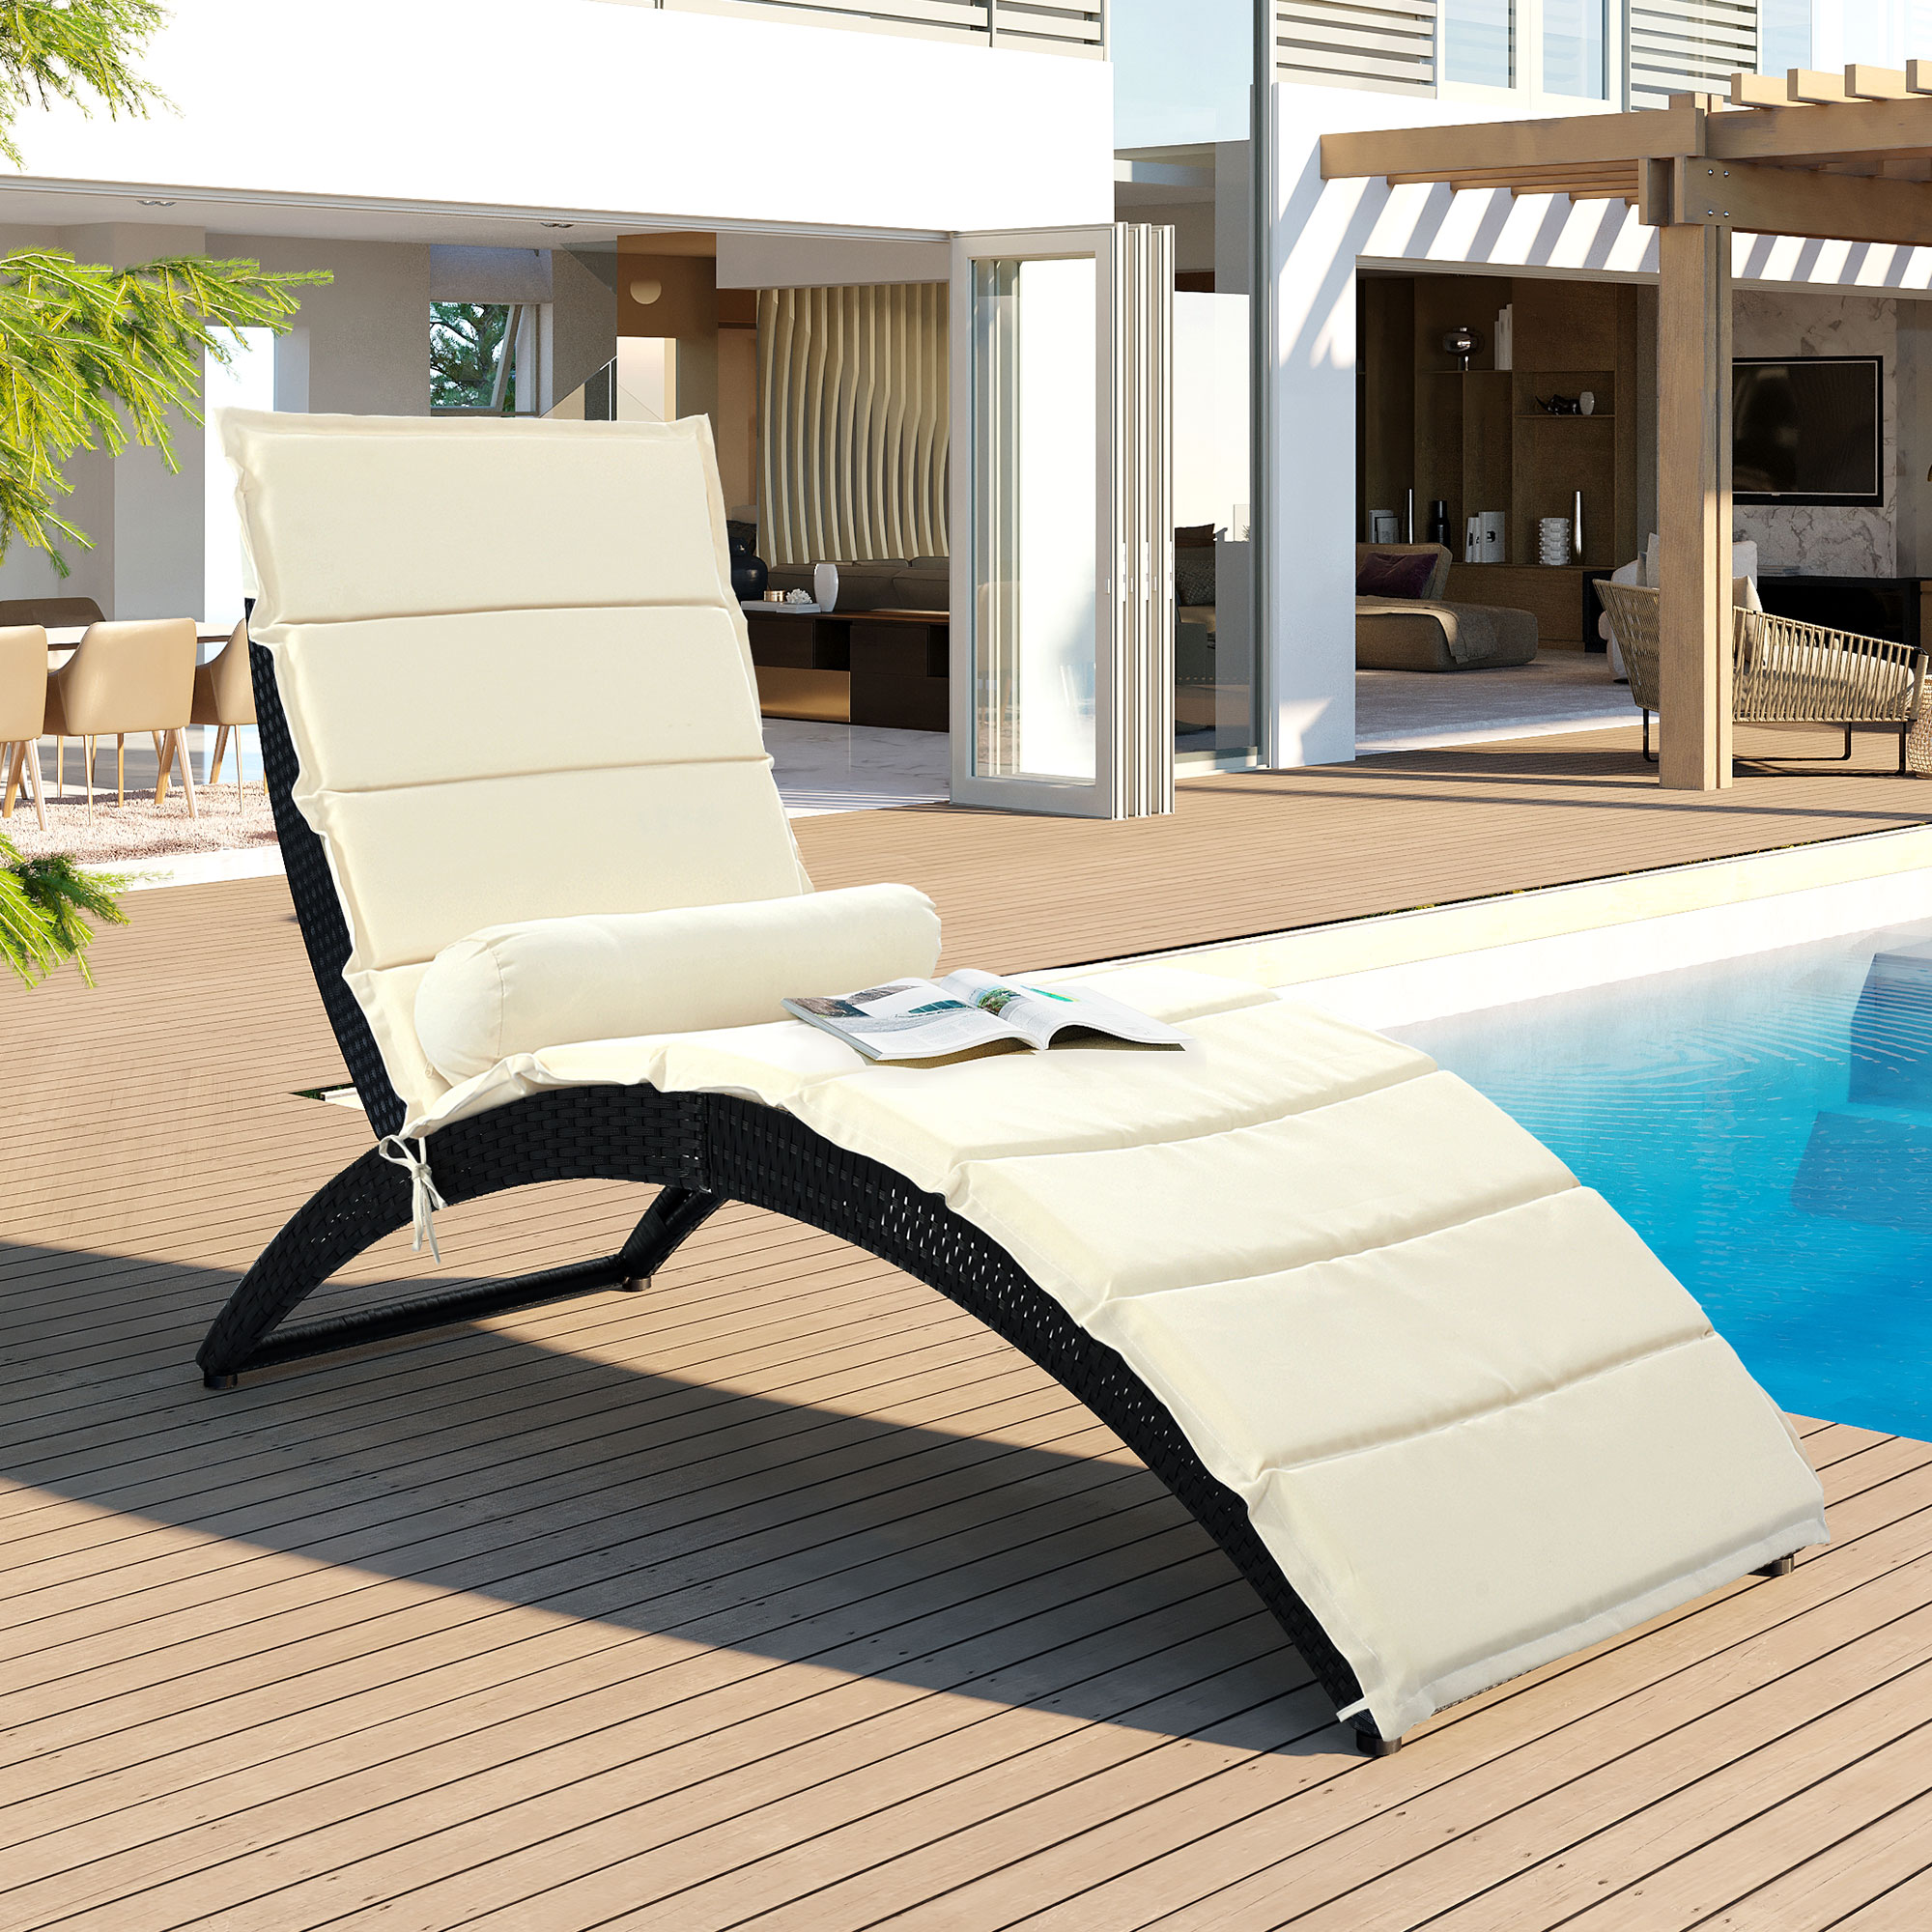 Patio Chaise Lounge, Folding Reclining Camping Chair, PE Rattan Sun Recliner Chair with Seat Cushion, Poolside Garden Outdoor Chaise Lounge Chairs, JA1105 - image 1 of 8